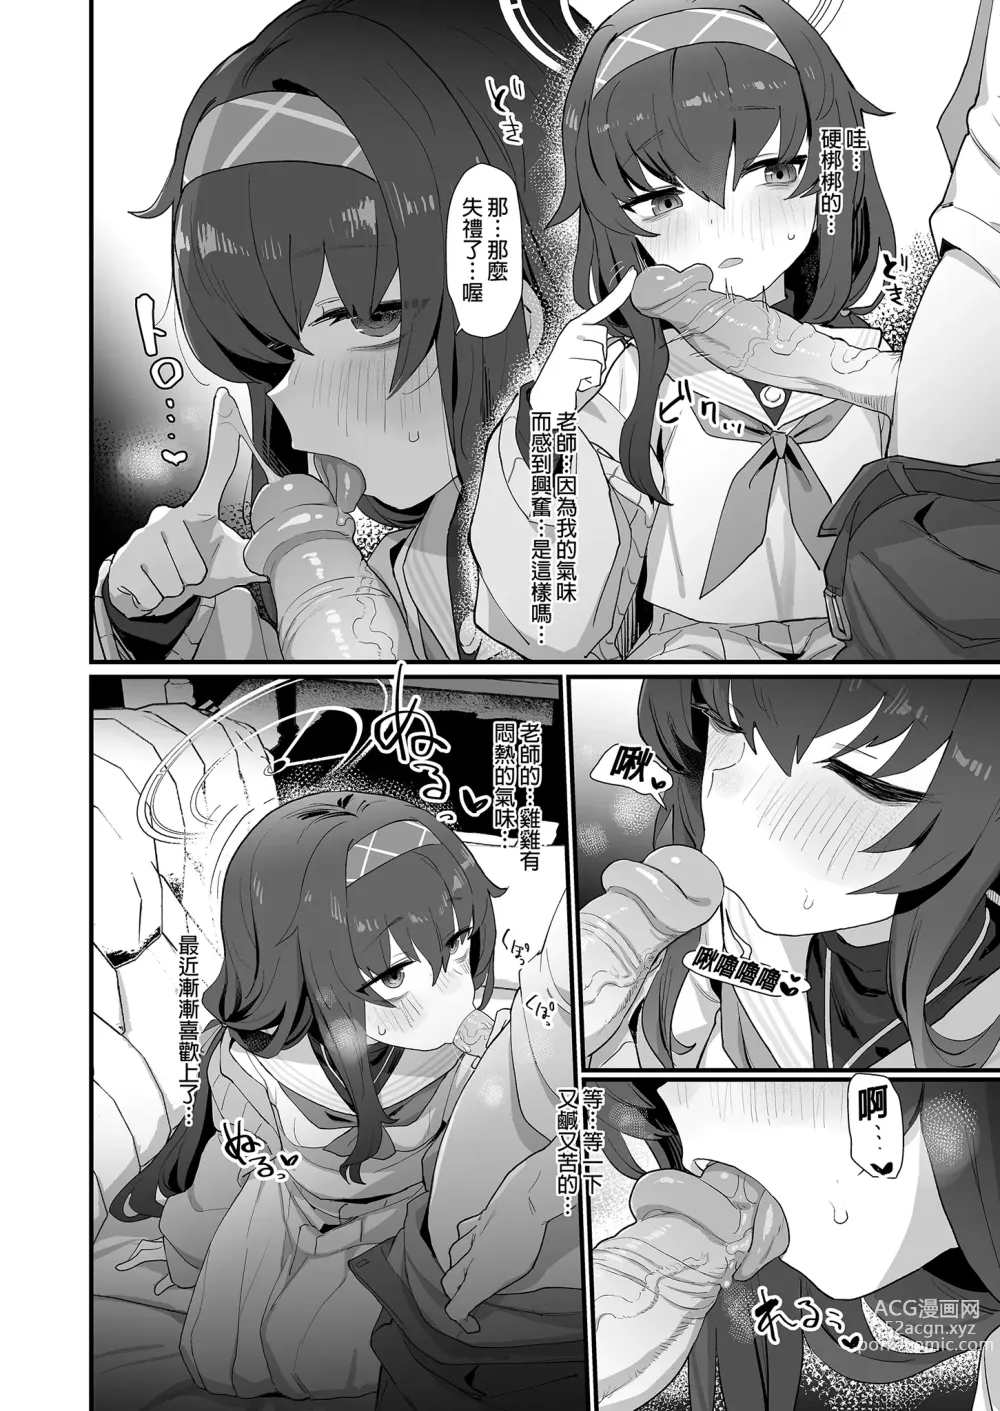 Page 8 of doujinshi 古書館願望清單 (decensored)